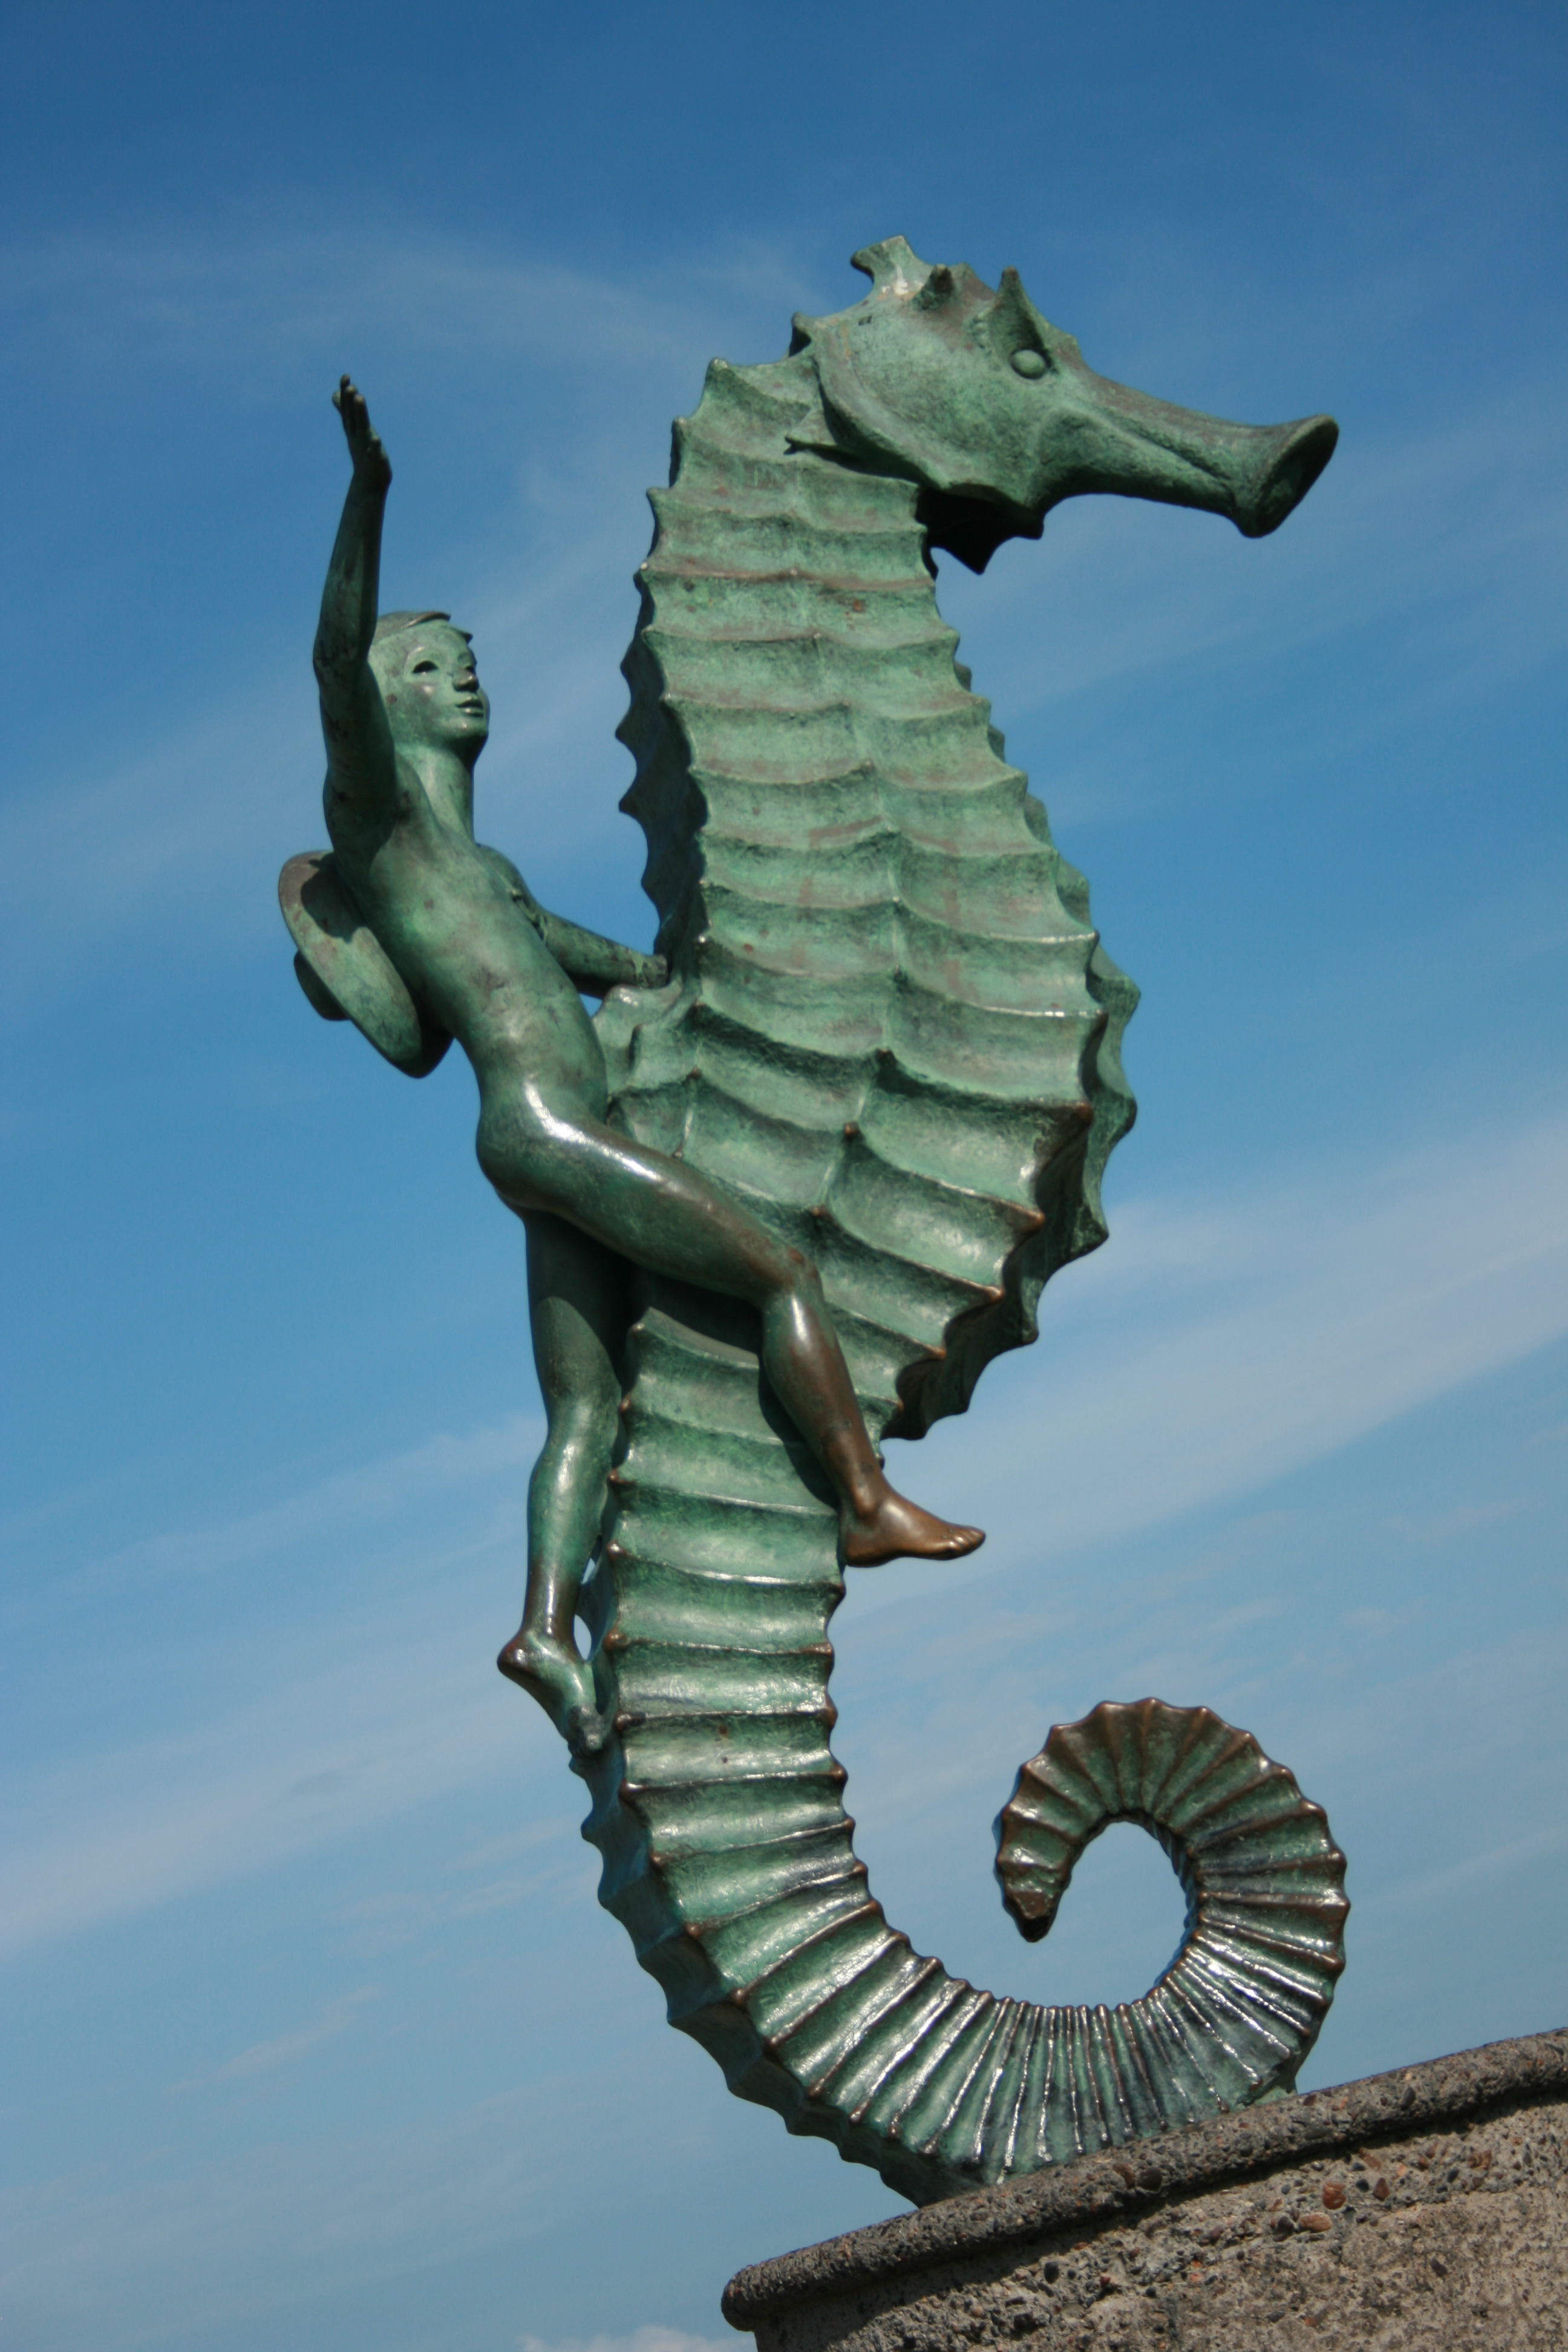 Newcastle upon Tyne has had seahorses on its crest since the 1500s, but are there any seahorses in folklore? What do they represent?